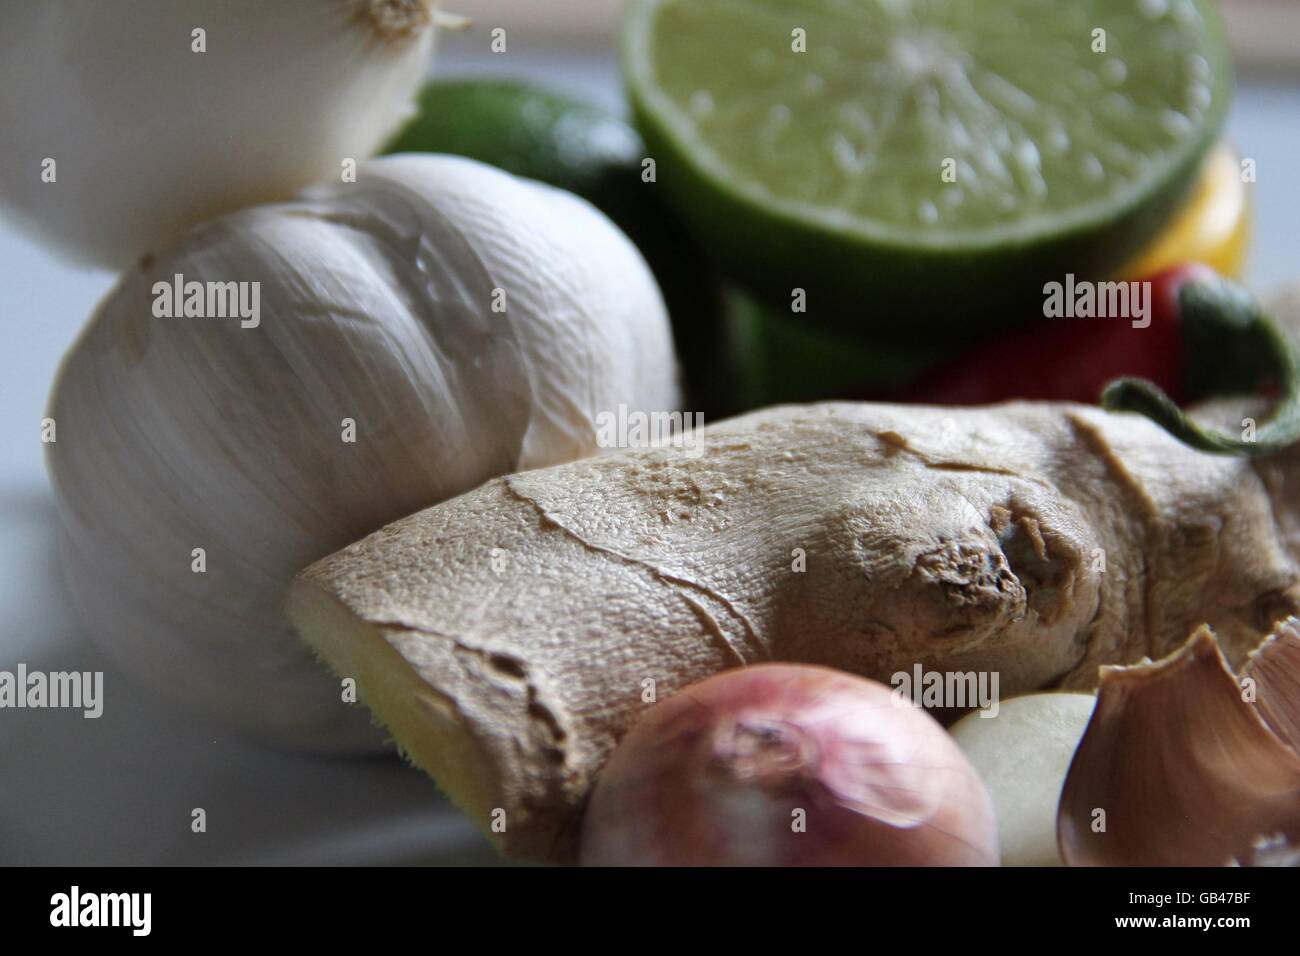 Ingredients for Asian cooking. Stock Photo